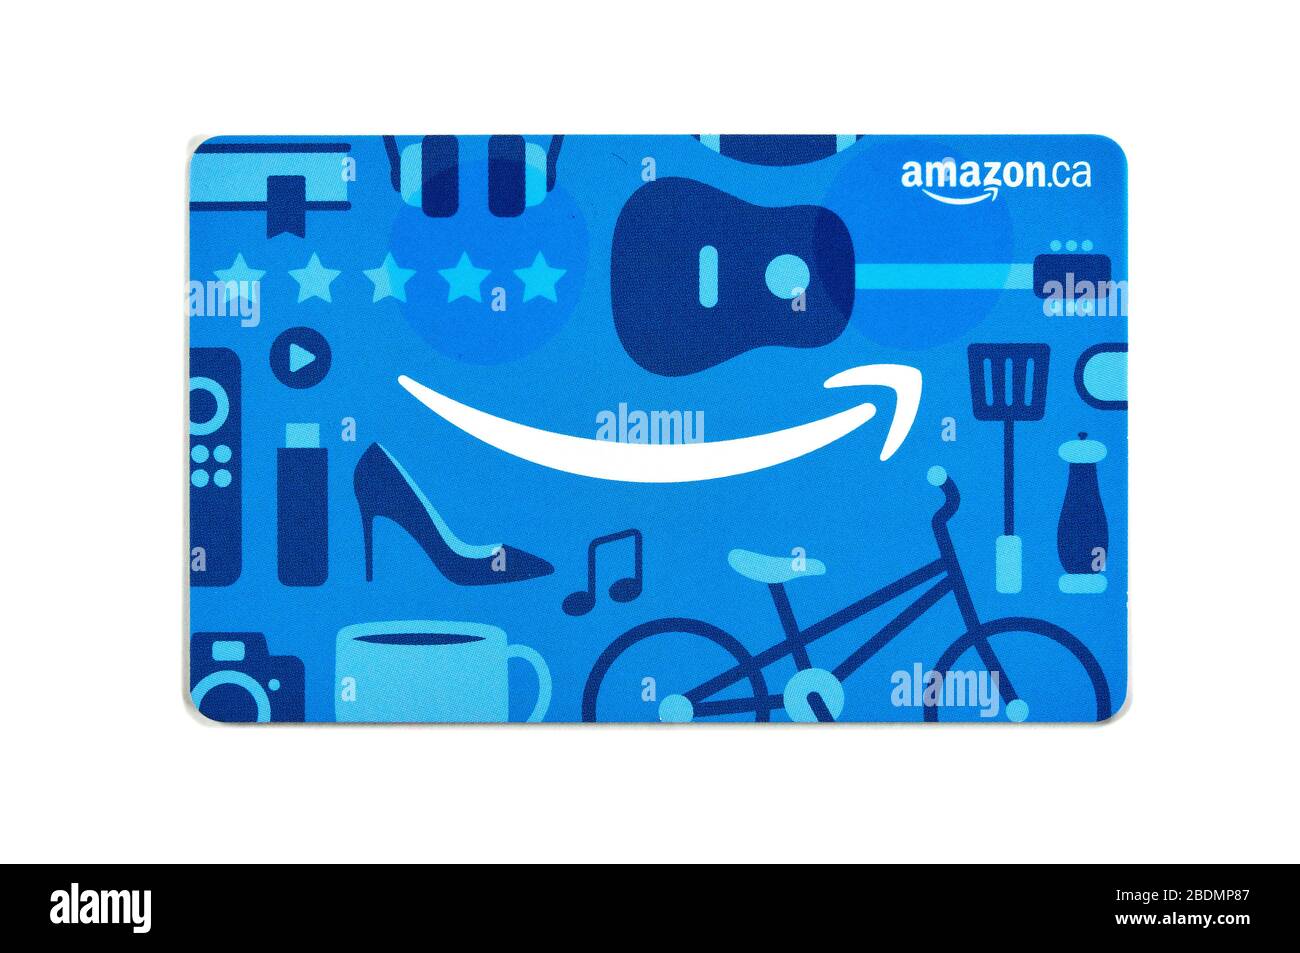 Montreal, Canada - April 6, 2020: Amazon gift cards. Amazon is a titan of e-commerce, logistics, payments, hardware, data storage, cloud computing, an Stock Photo